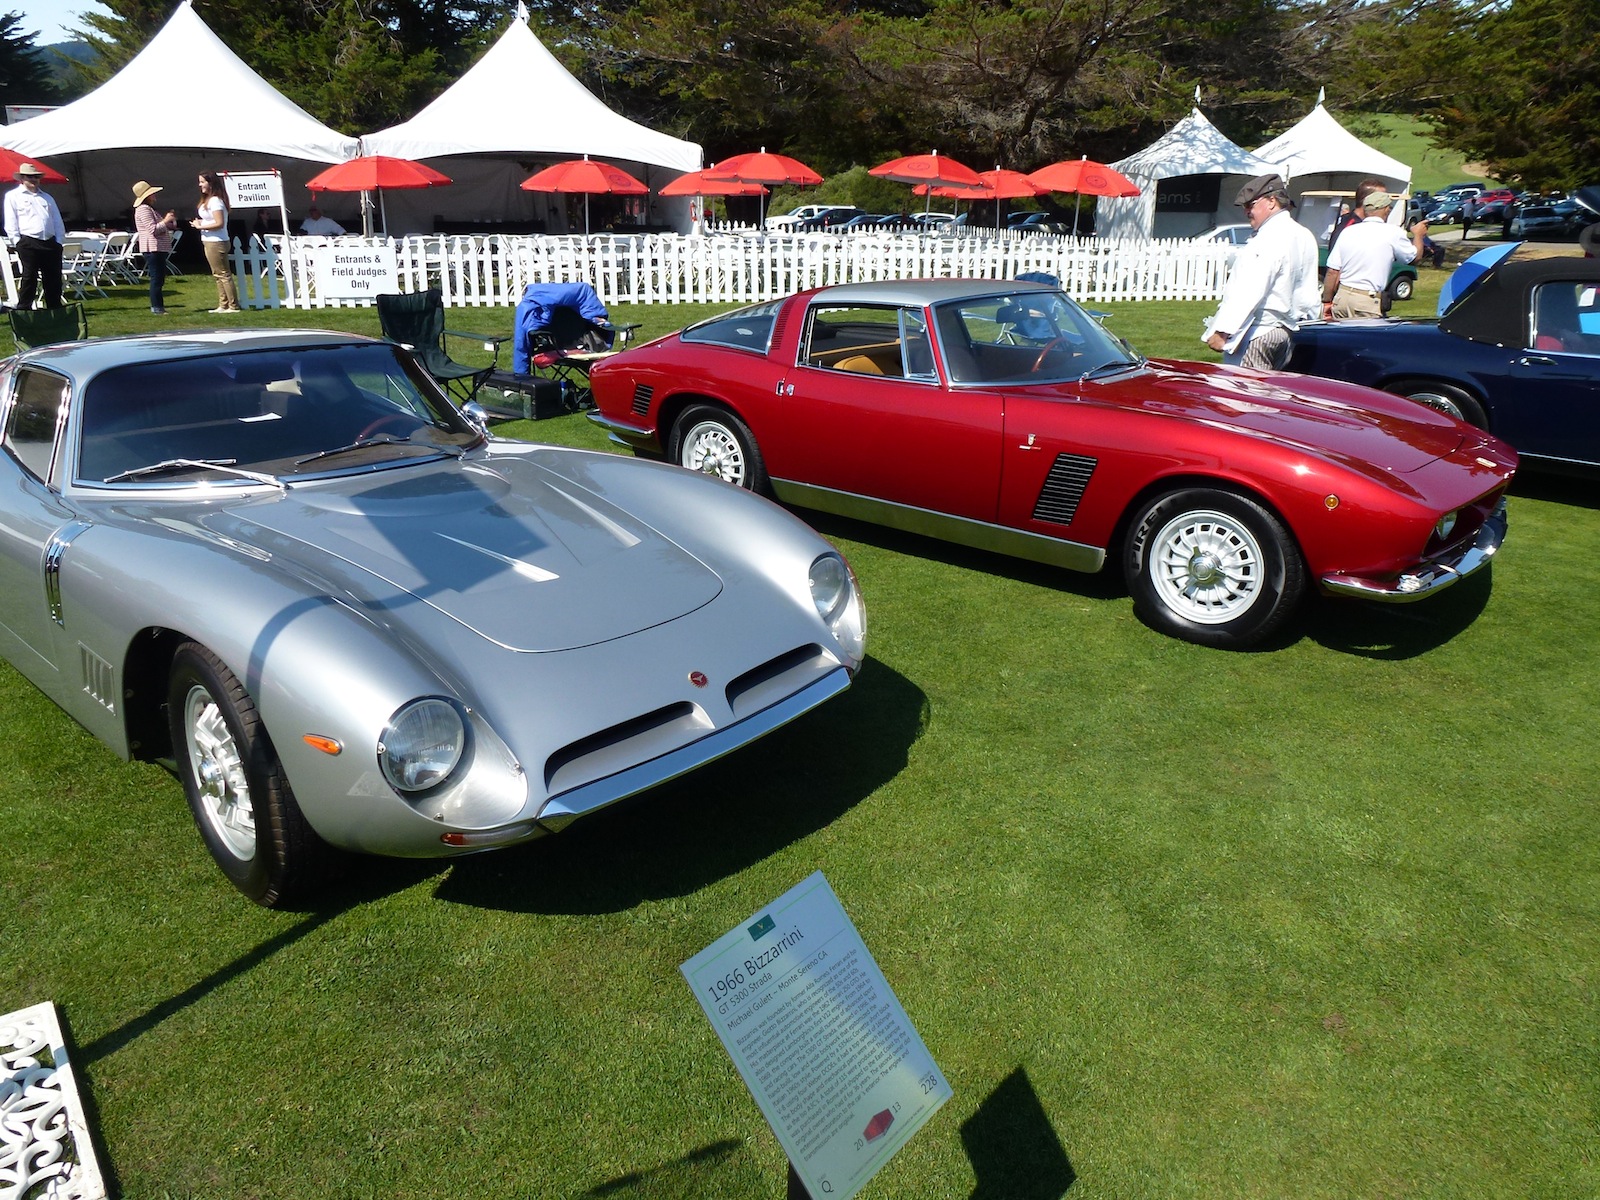 Iso Grifo No. 009 And Bizzarrini GT 5300 No. 0256 Together - Side By Side